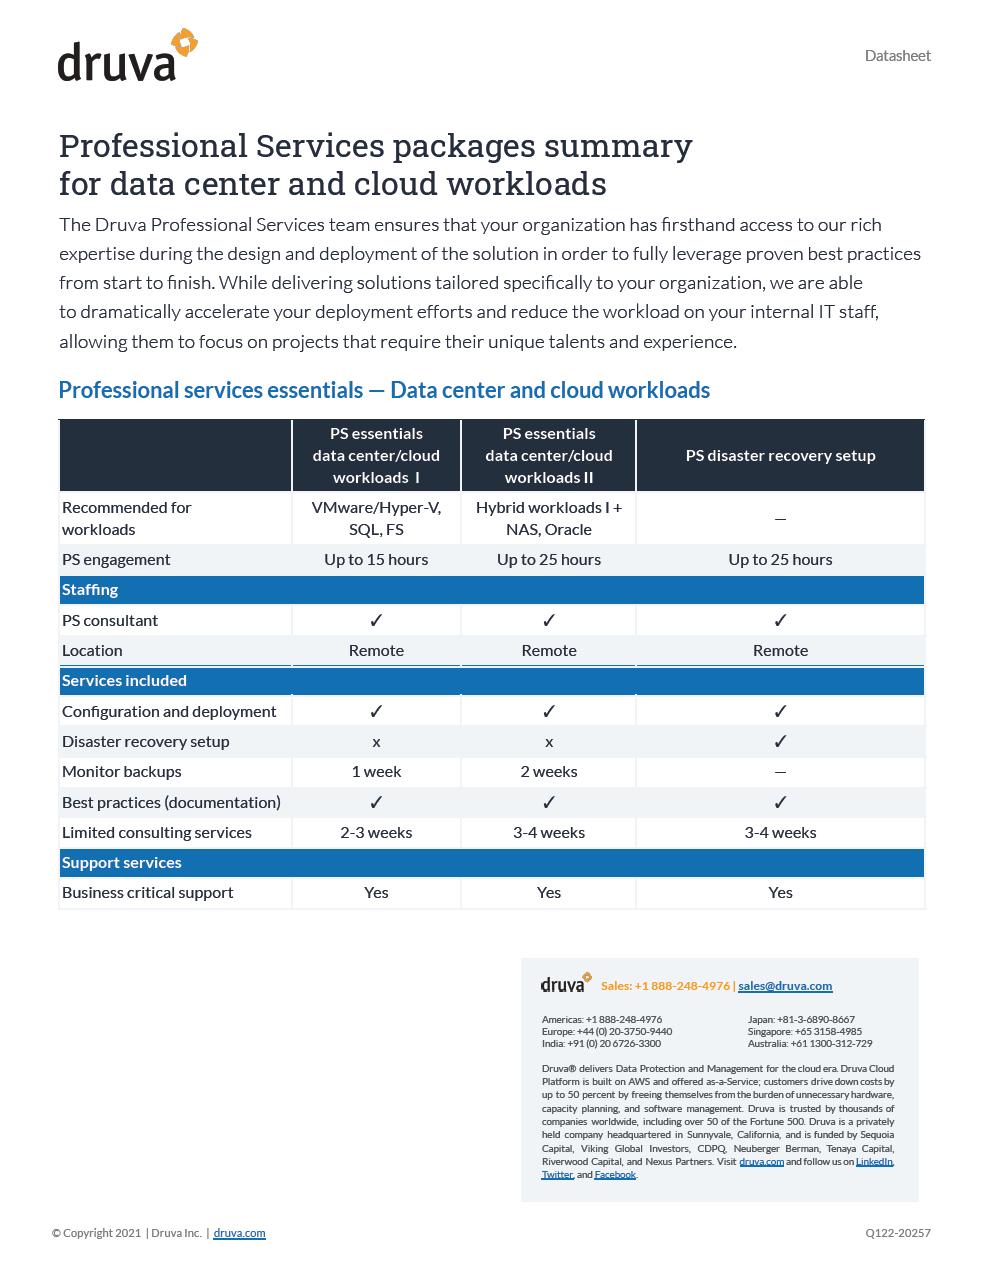 Professional Services packages summary for data center and cloud workloads